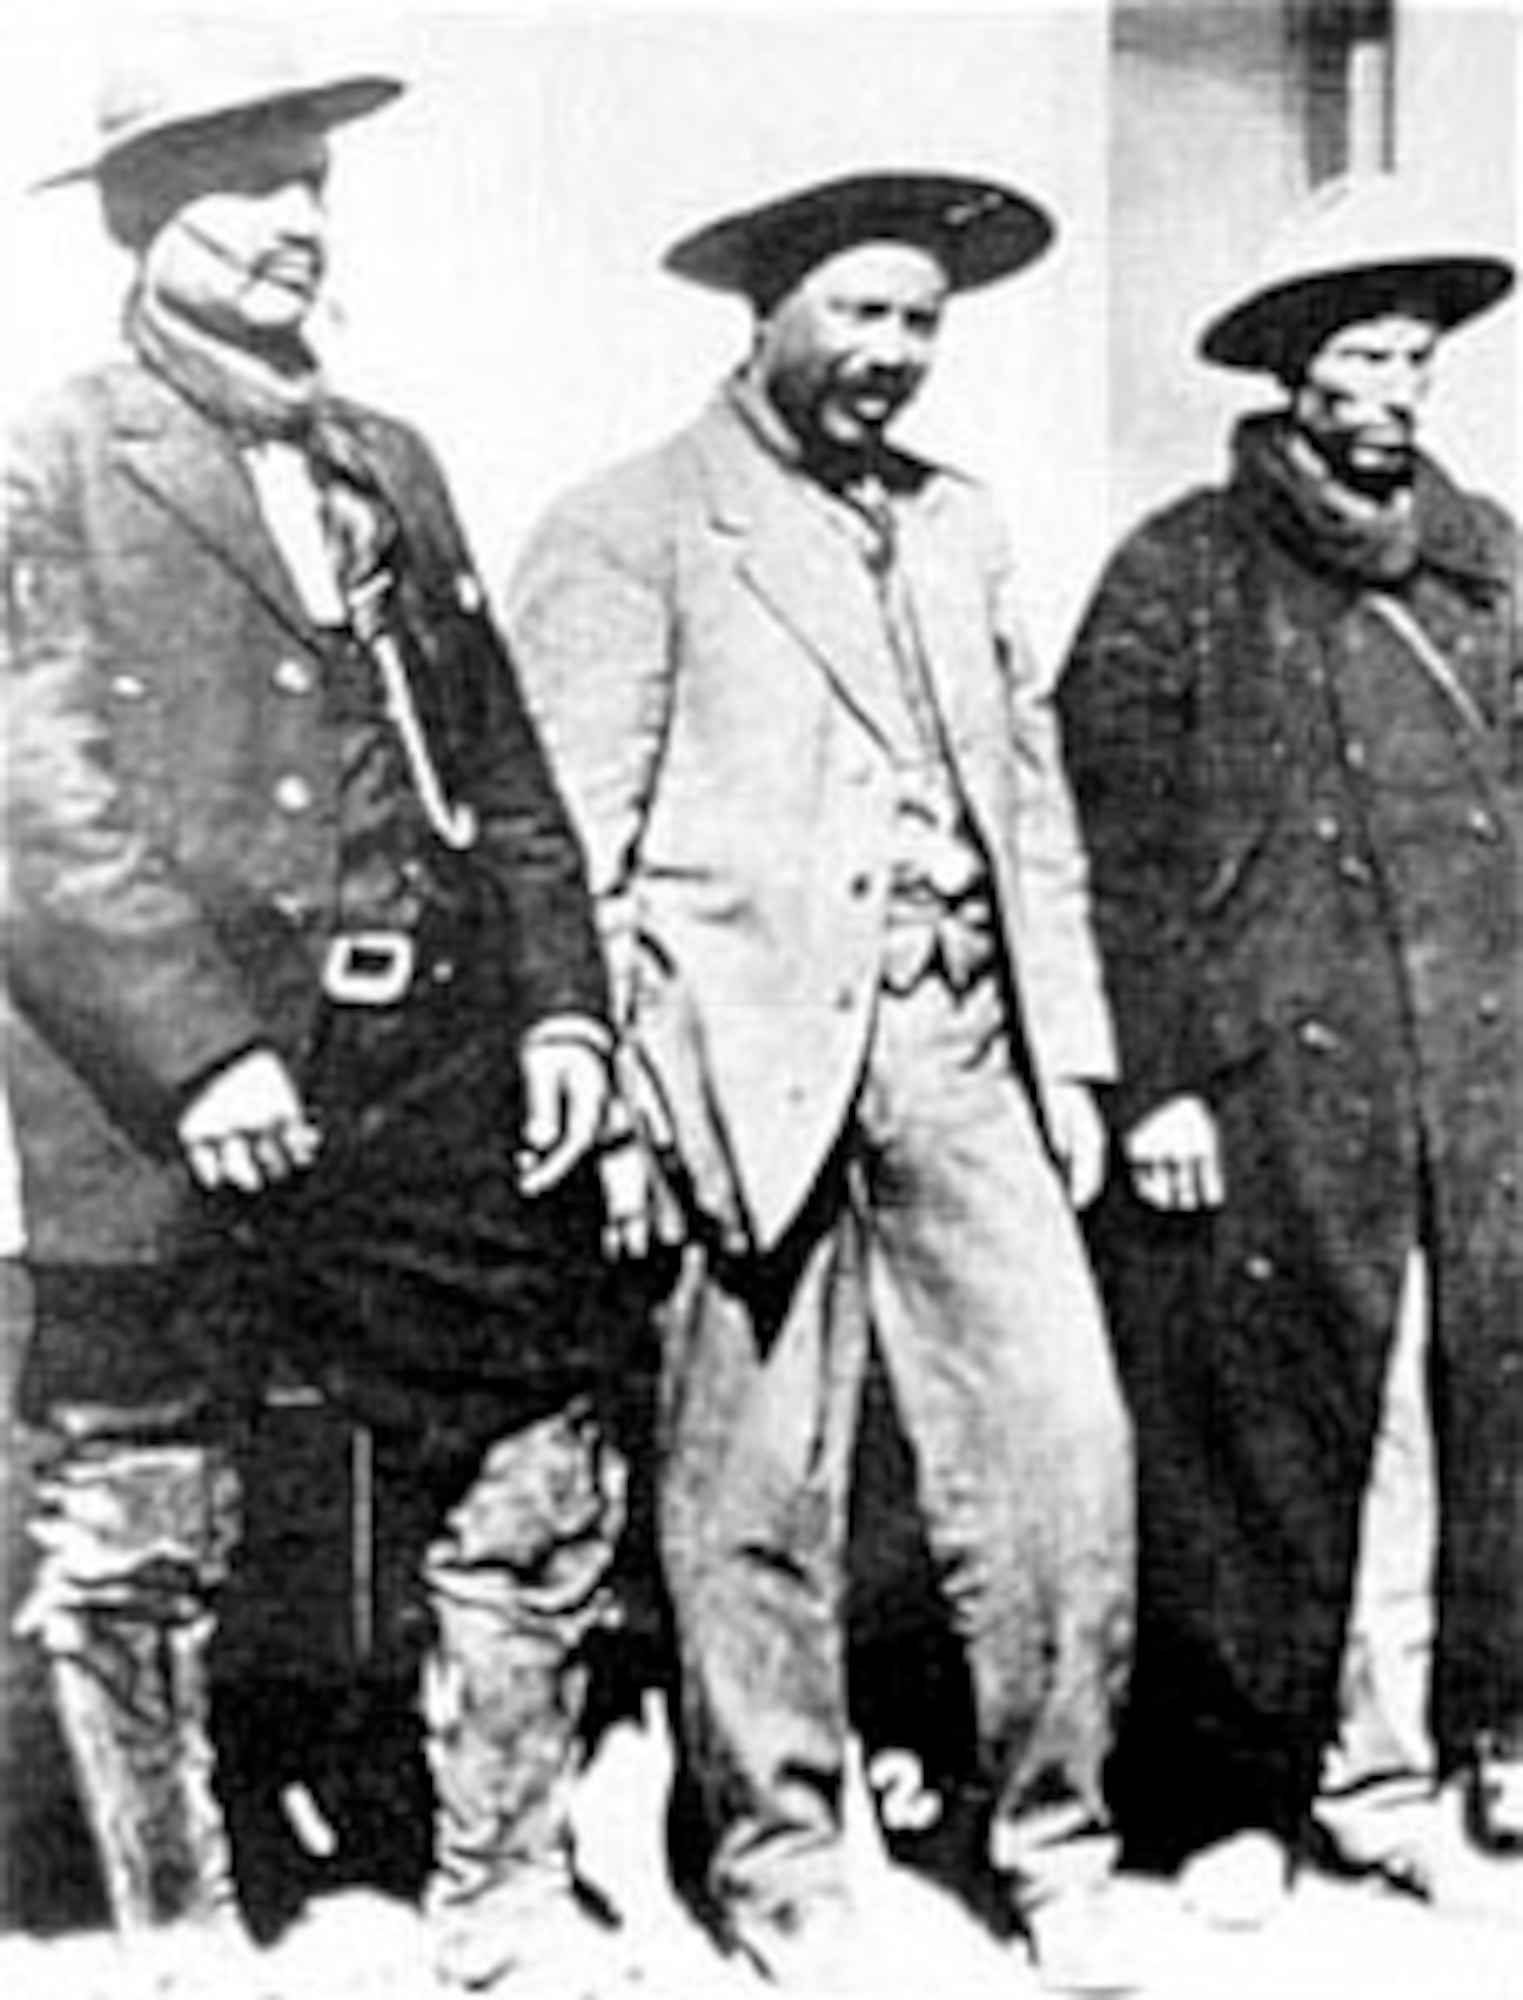 Pancho Villa, the Mexican revolutionary, flanked by two of his staff officers. (U.S. Air Force photo)